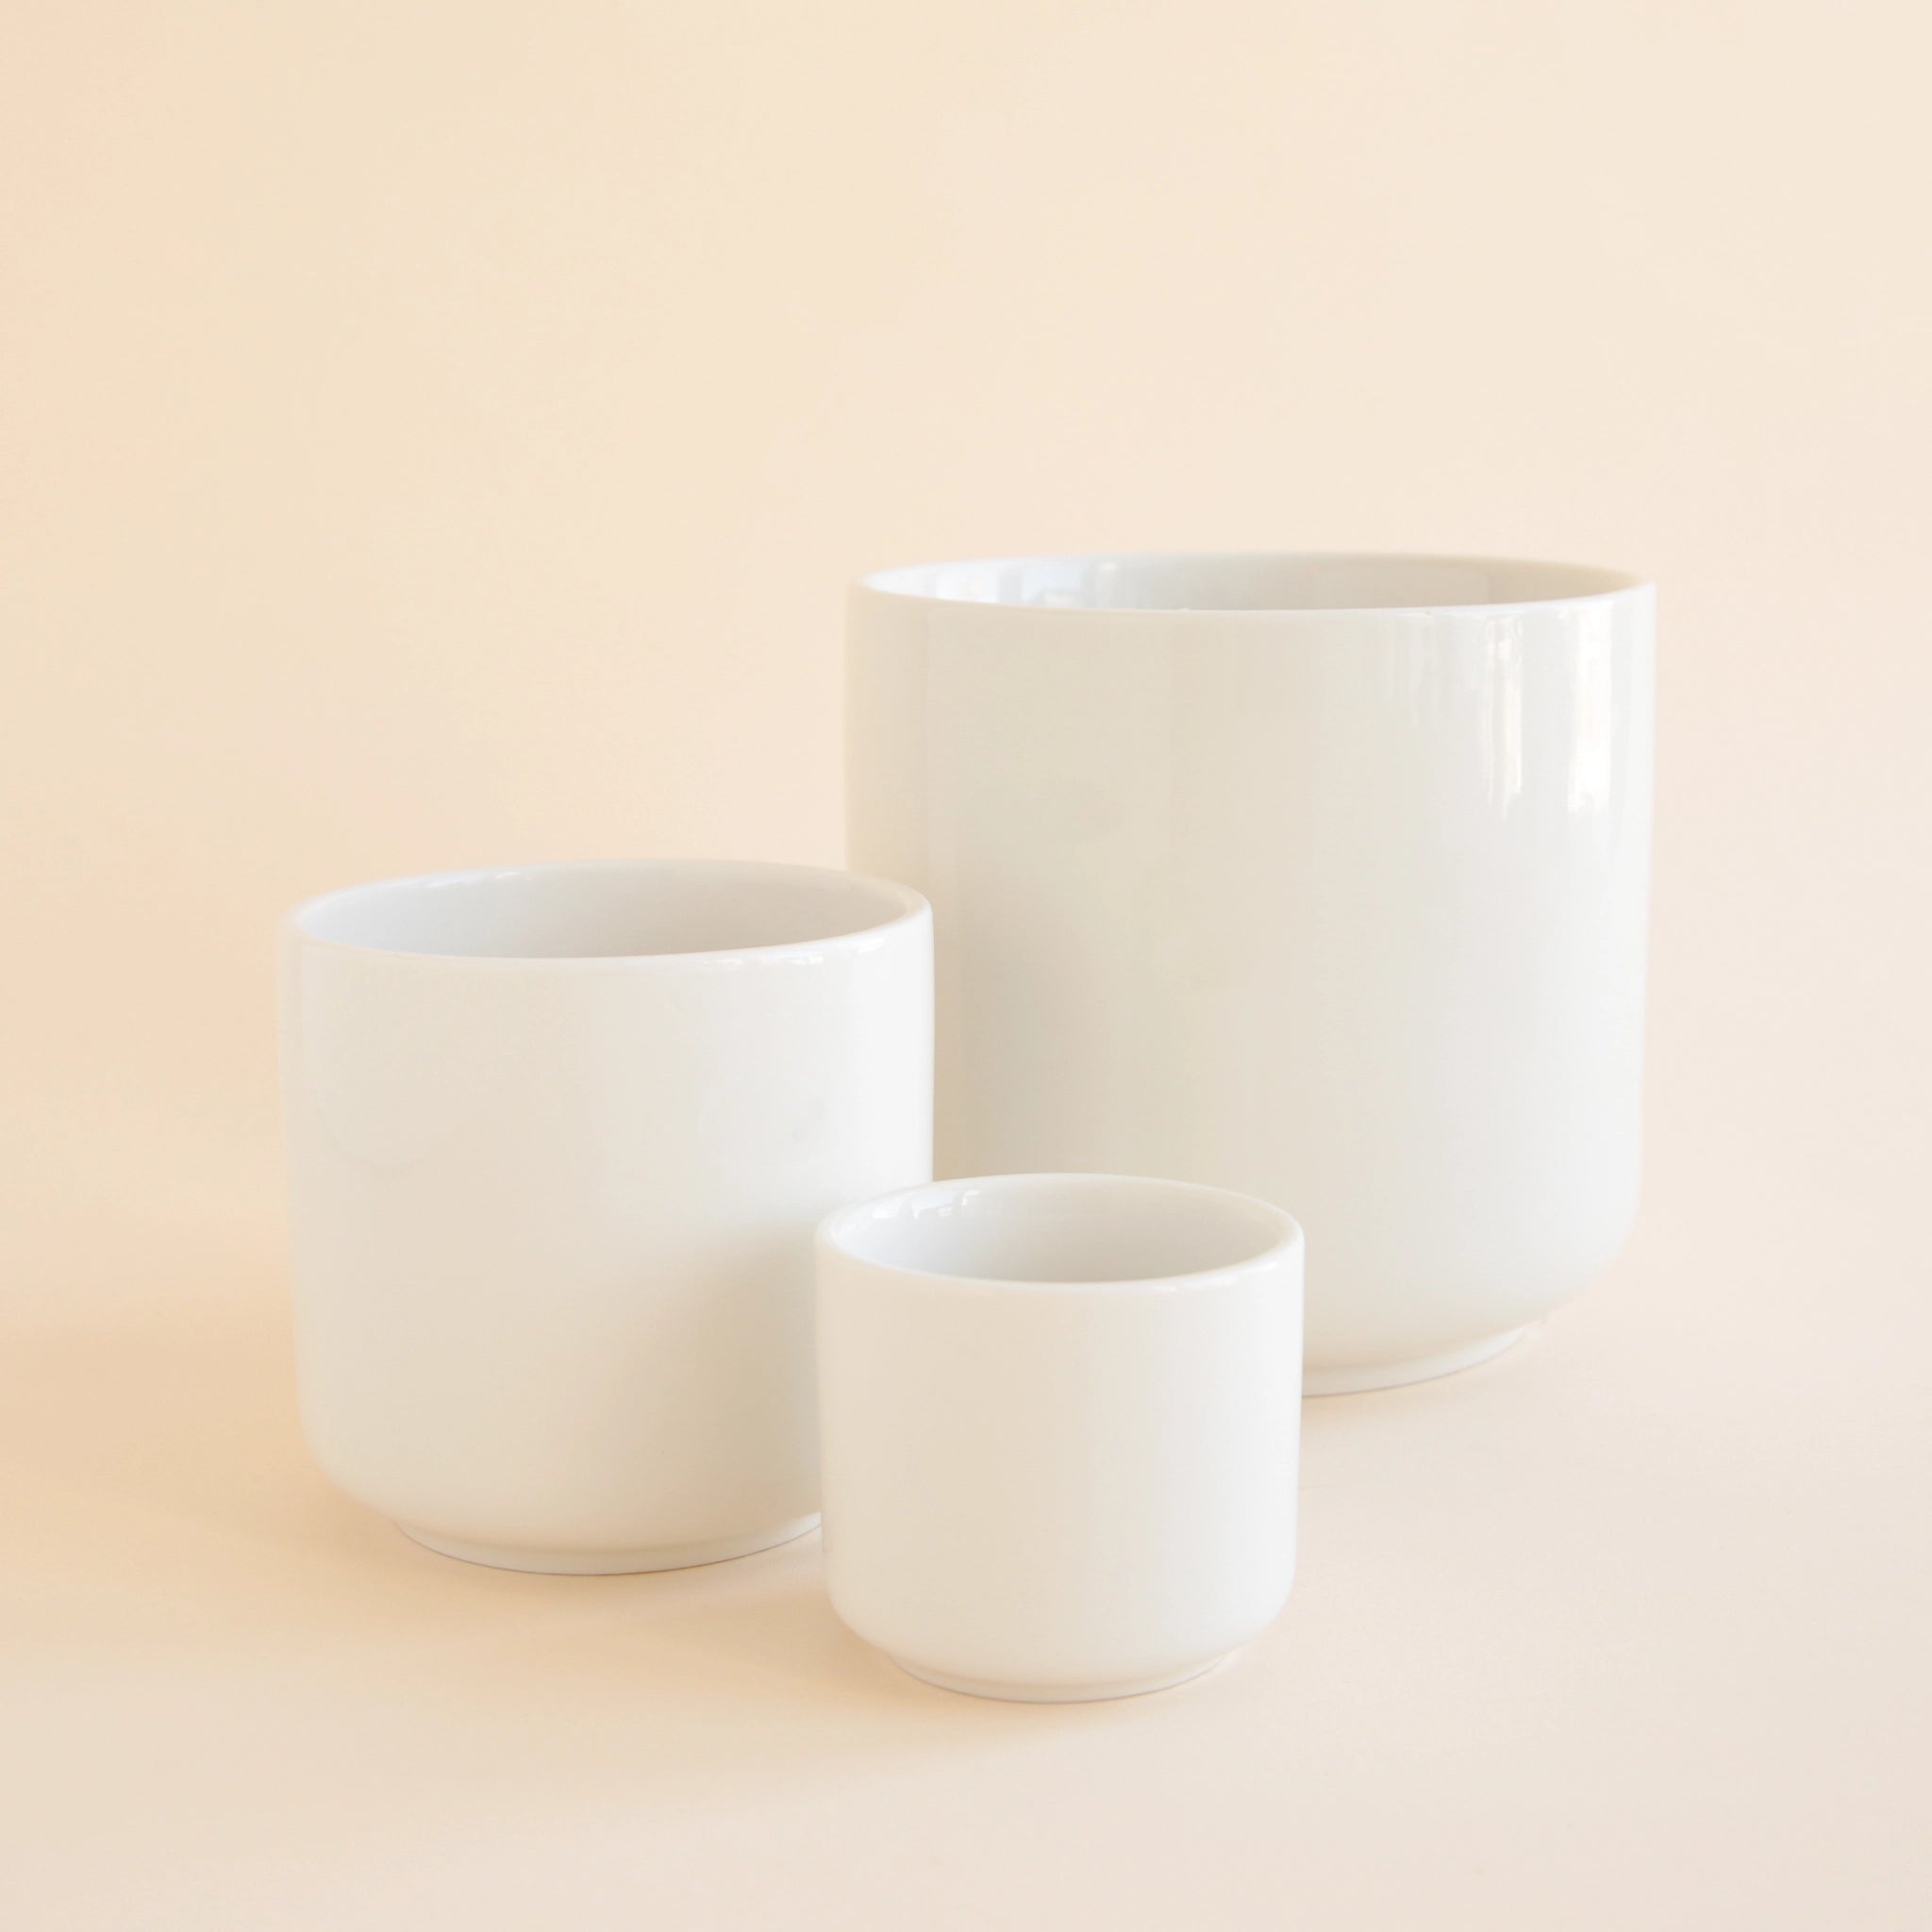 On a tan background is three different sized white ceramic planters with a glossy finish.